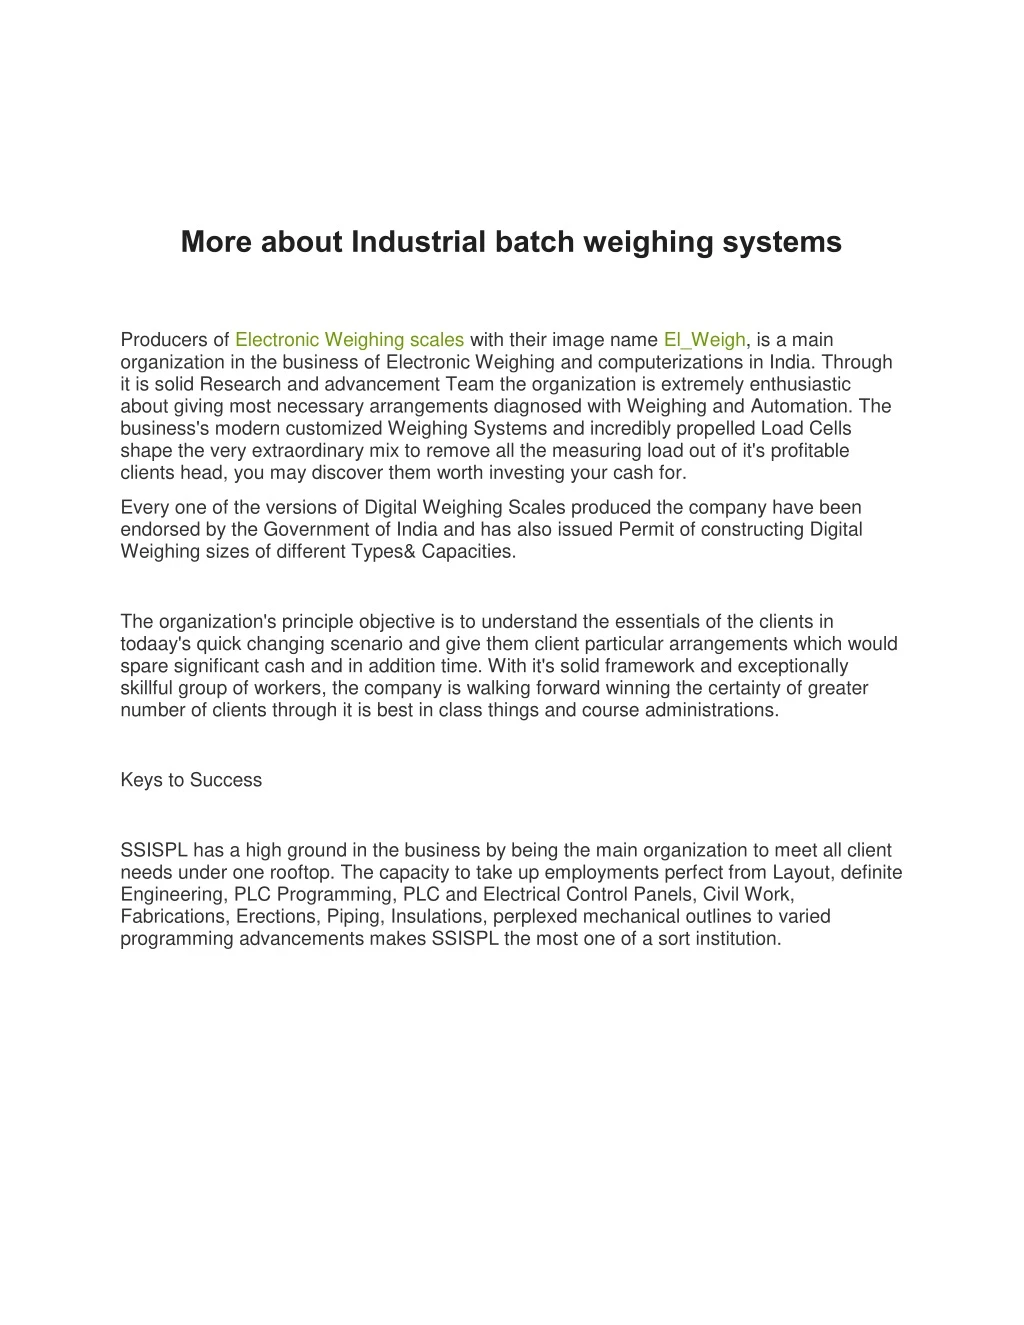 more about industrial batch weighing systems